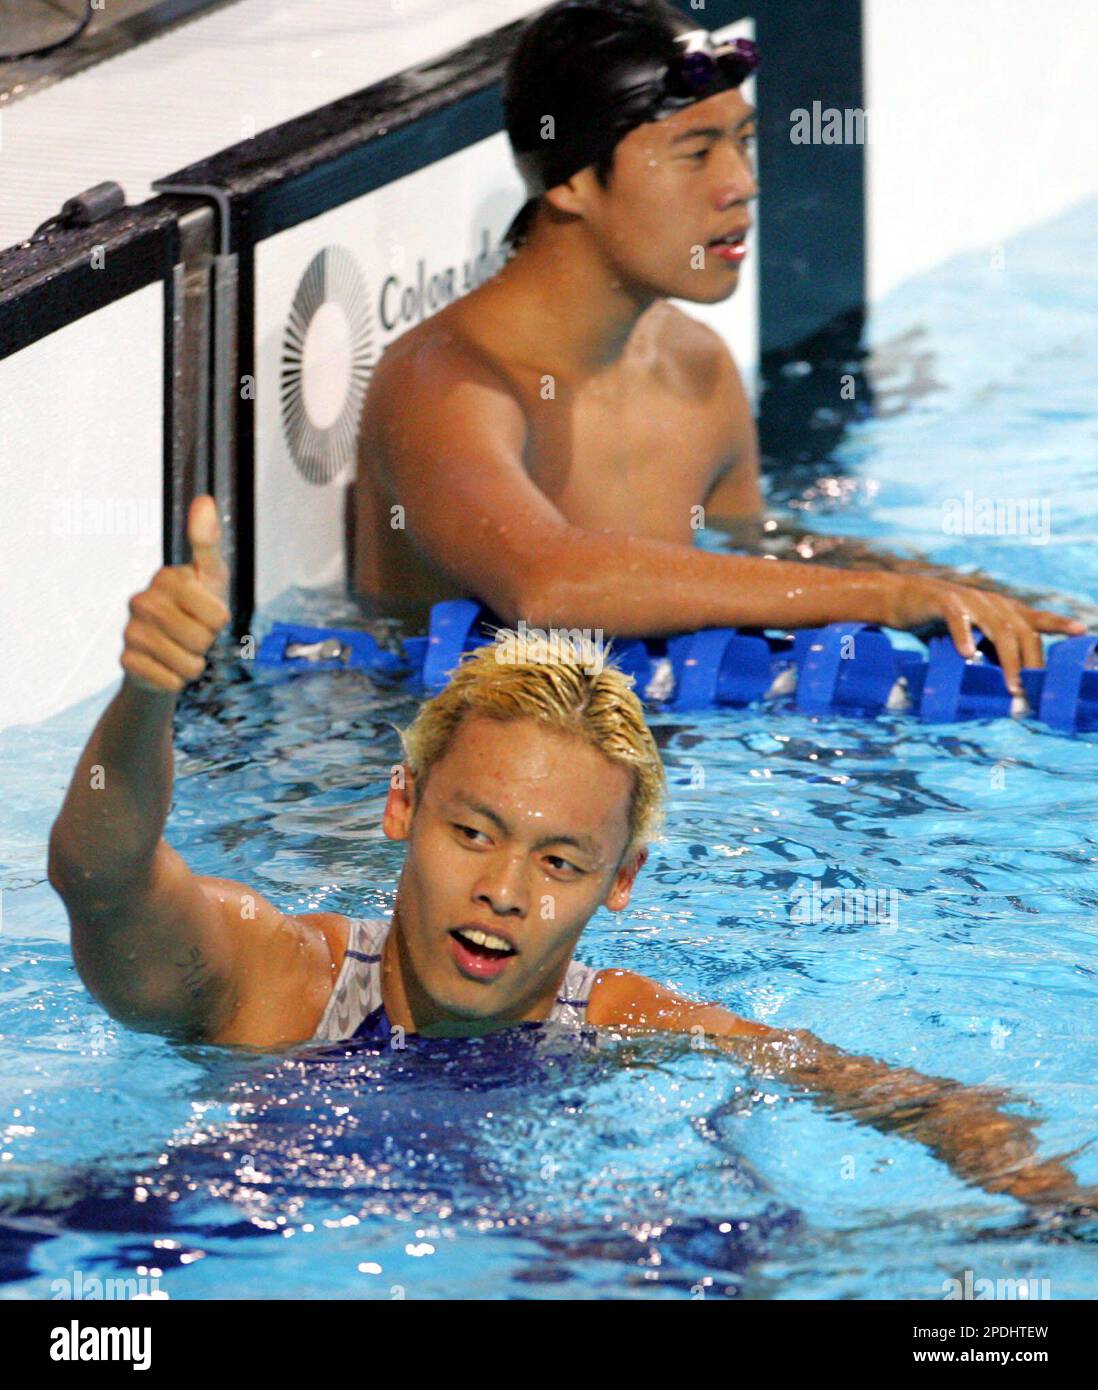 https://c8.alamy.com/comp/2PDHTEW/singapores-lionel-lee-flashes-the-thumbs-up-sign-following-his-gold-medal-finish-in-the-mens-400m-freestyle-finals-of-the-23rd-sea-games-thursday-dec-1-2005-at-trace-college-at-los-banos-south-of-manila-philippines-lee-clocked-40051-seconds-to-win-gold-ap-photobullit-marquez-2PDHTEW.jpg